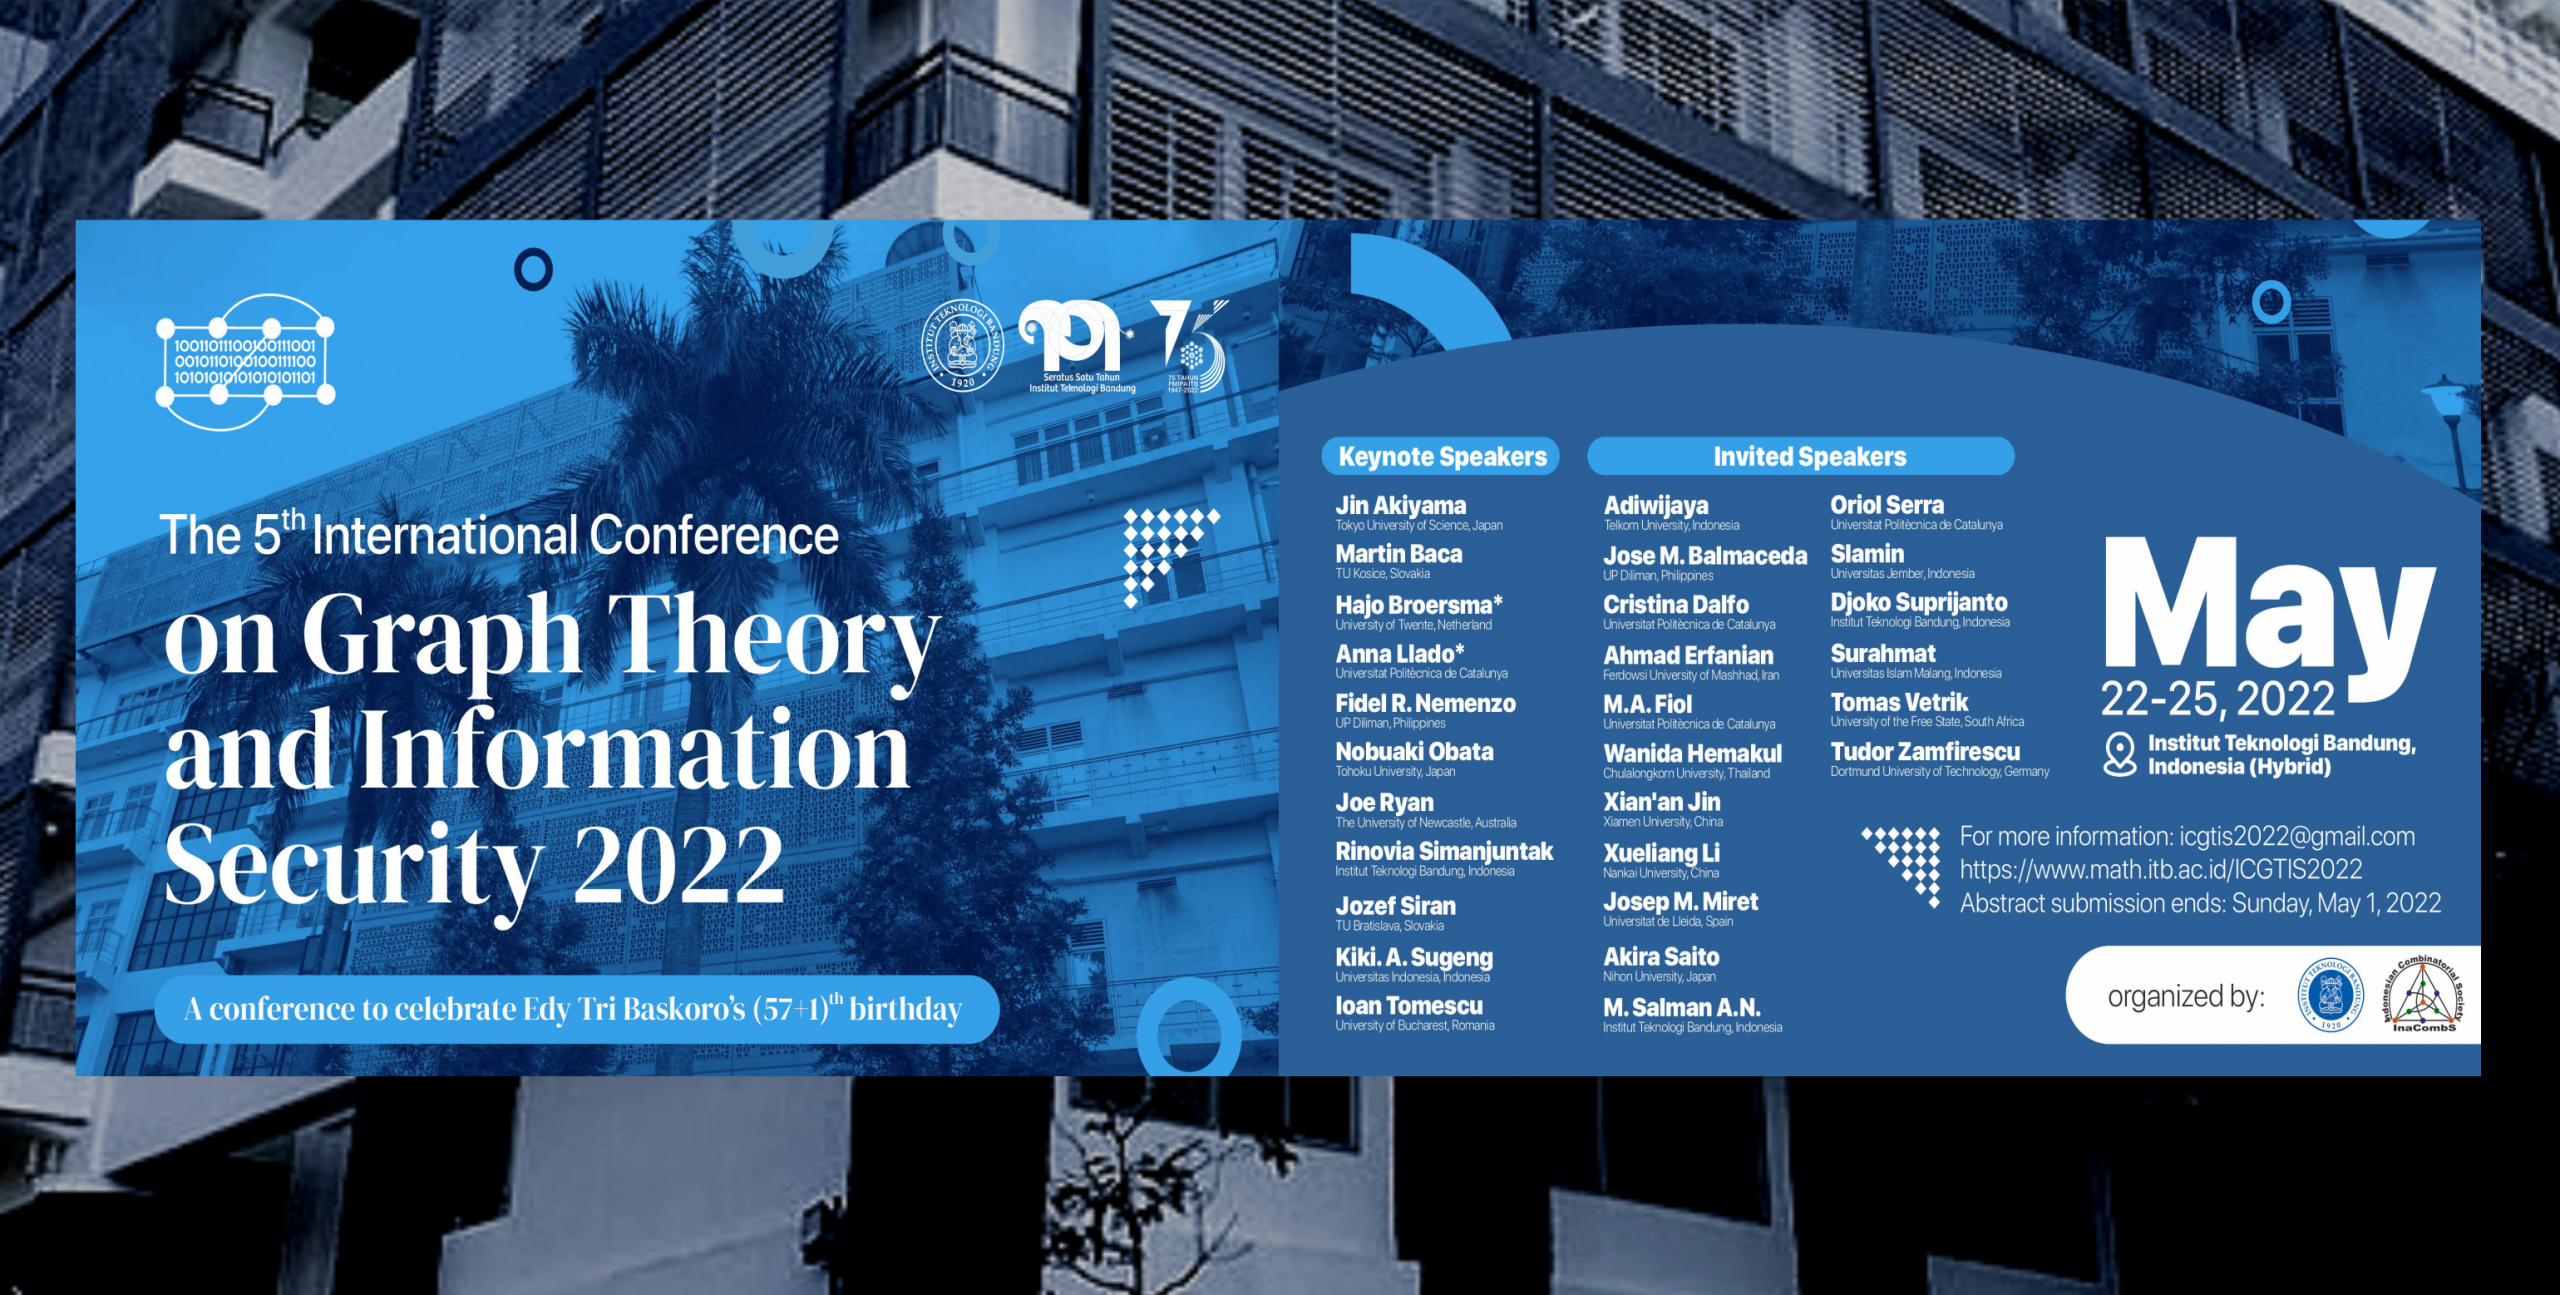 5th International Conference on Graph Theory and Information Security 2022